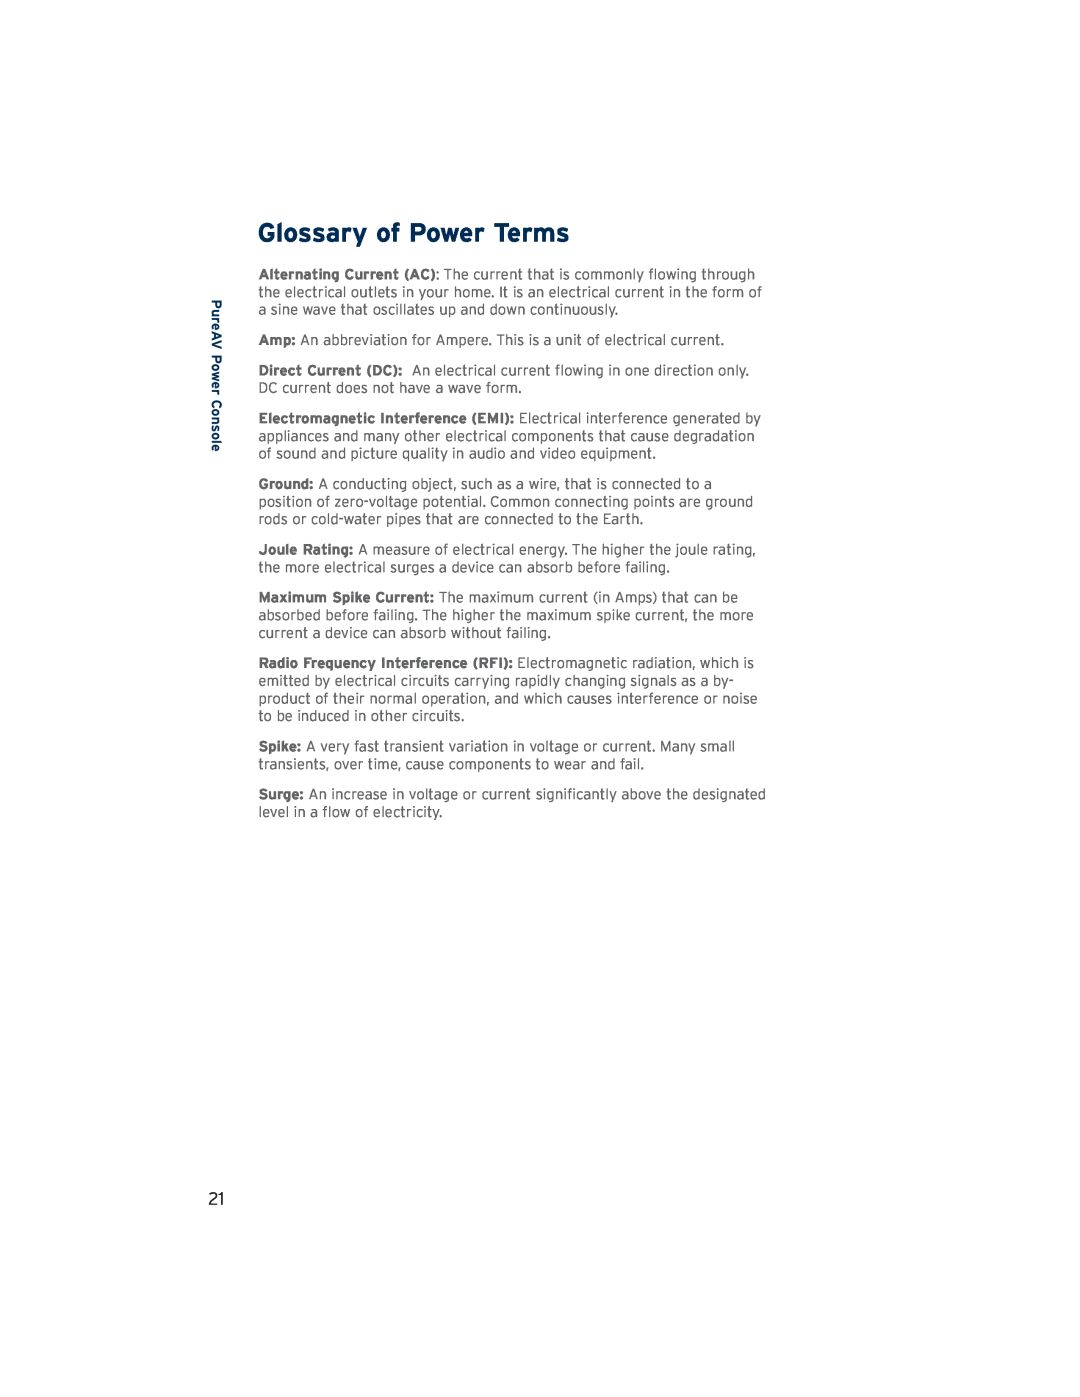 Belkin AP21300-12 user manual Glossary of Power Terms, PureAV Power Console 